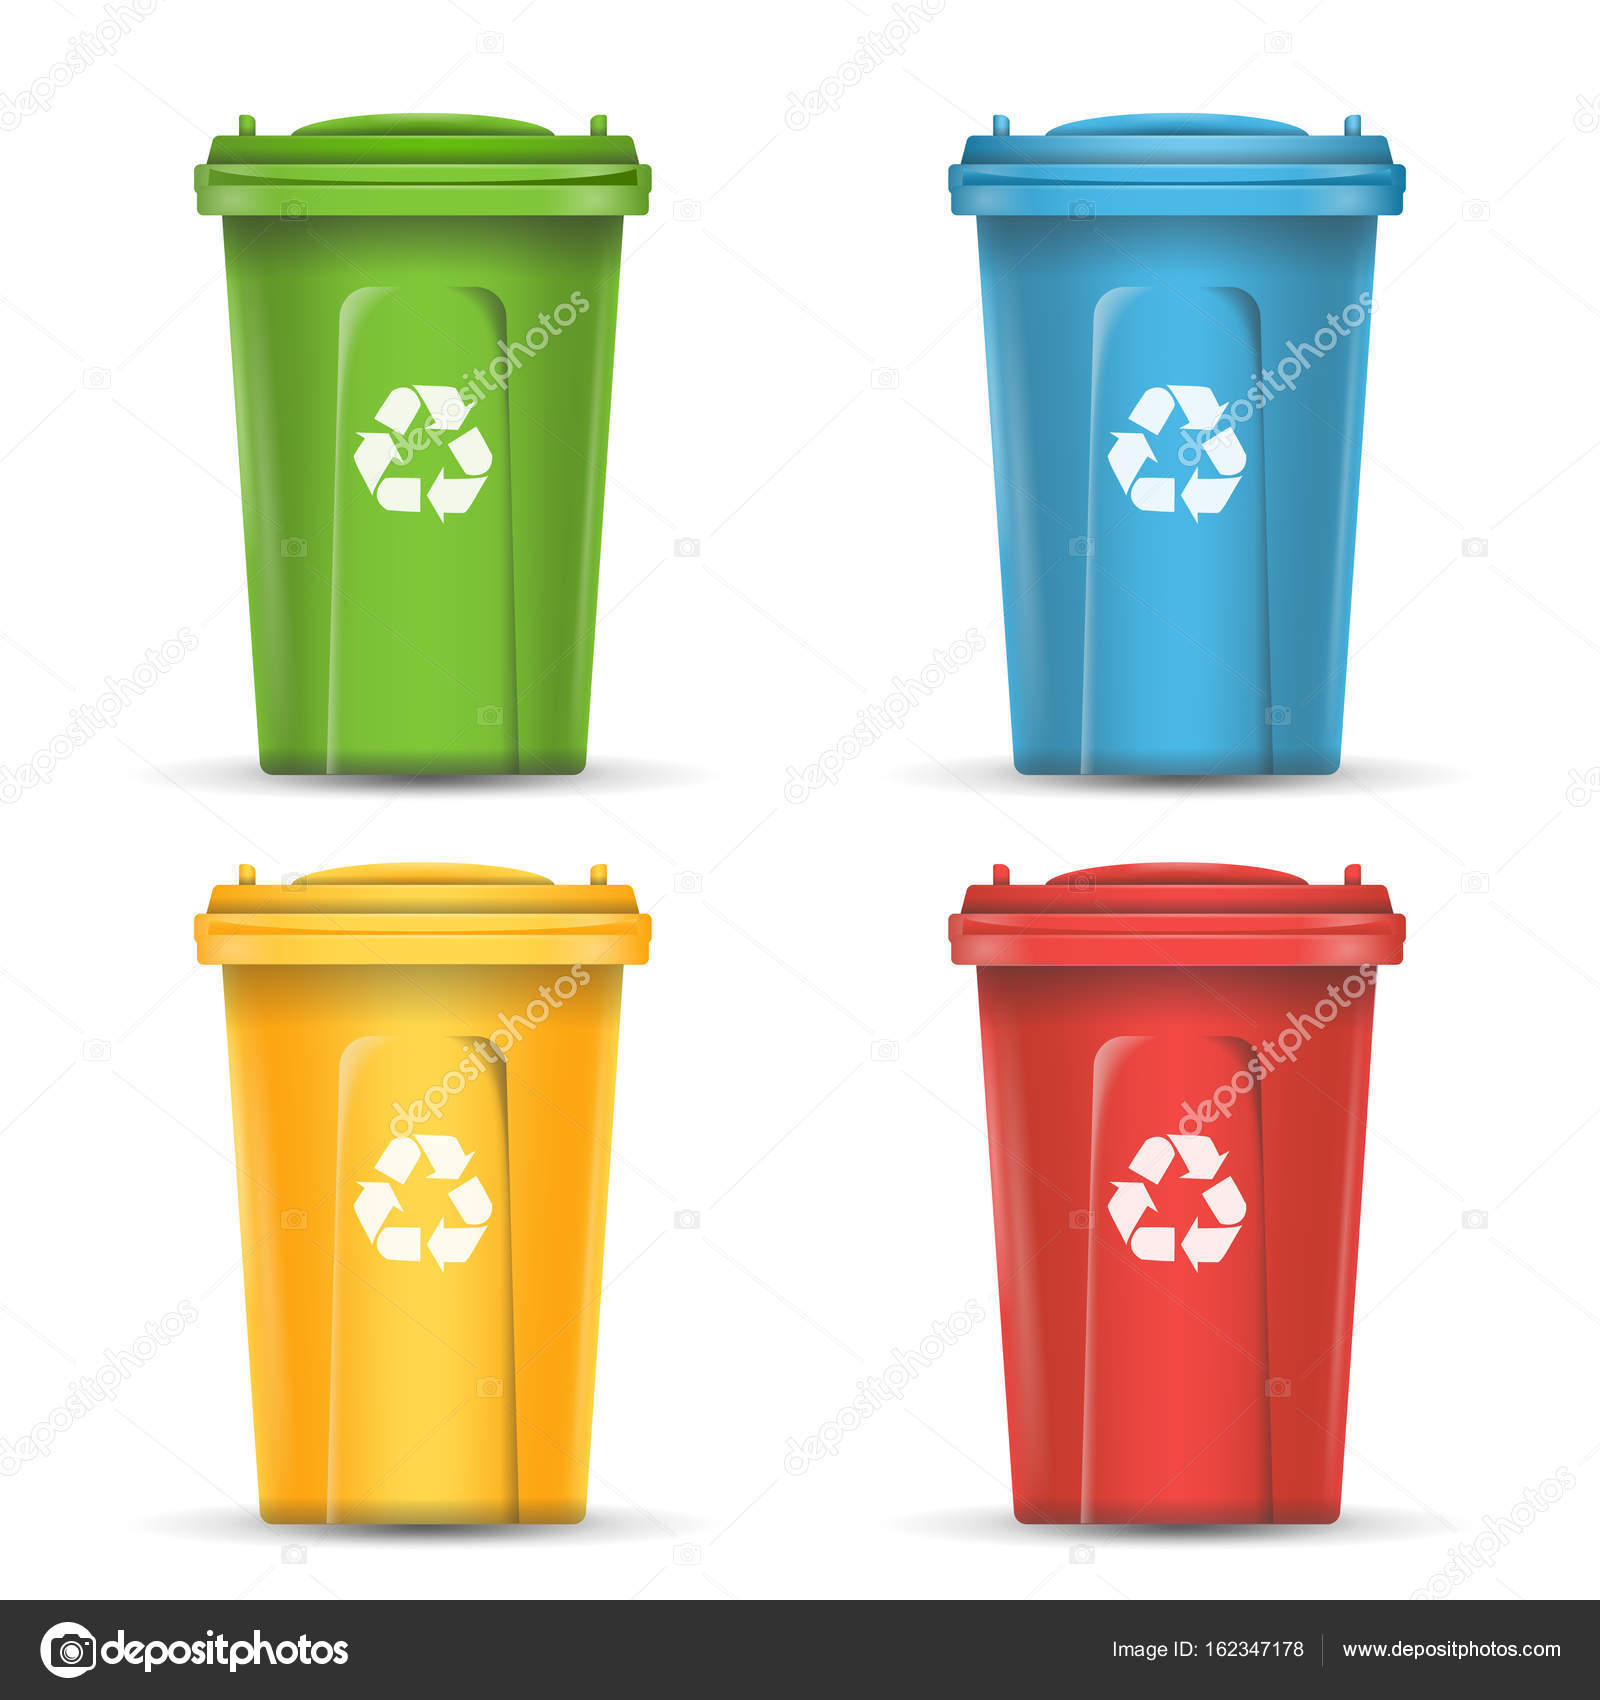 Waste bins flat recycling containers bin sorting Vector Image